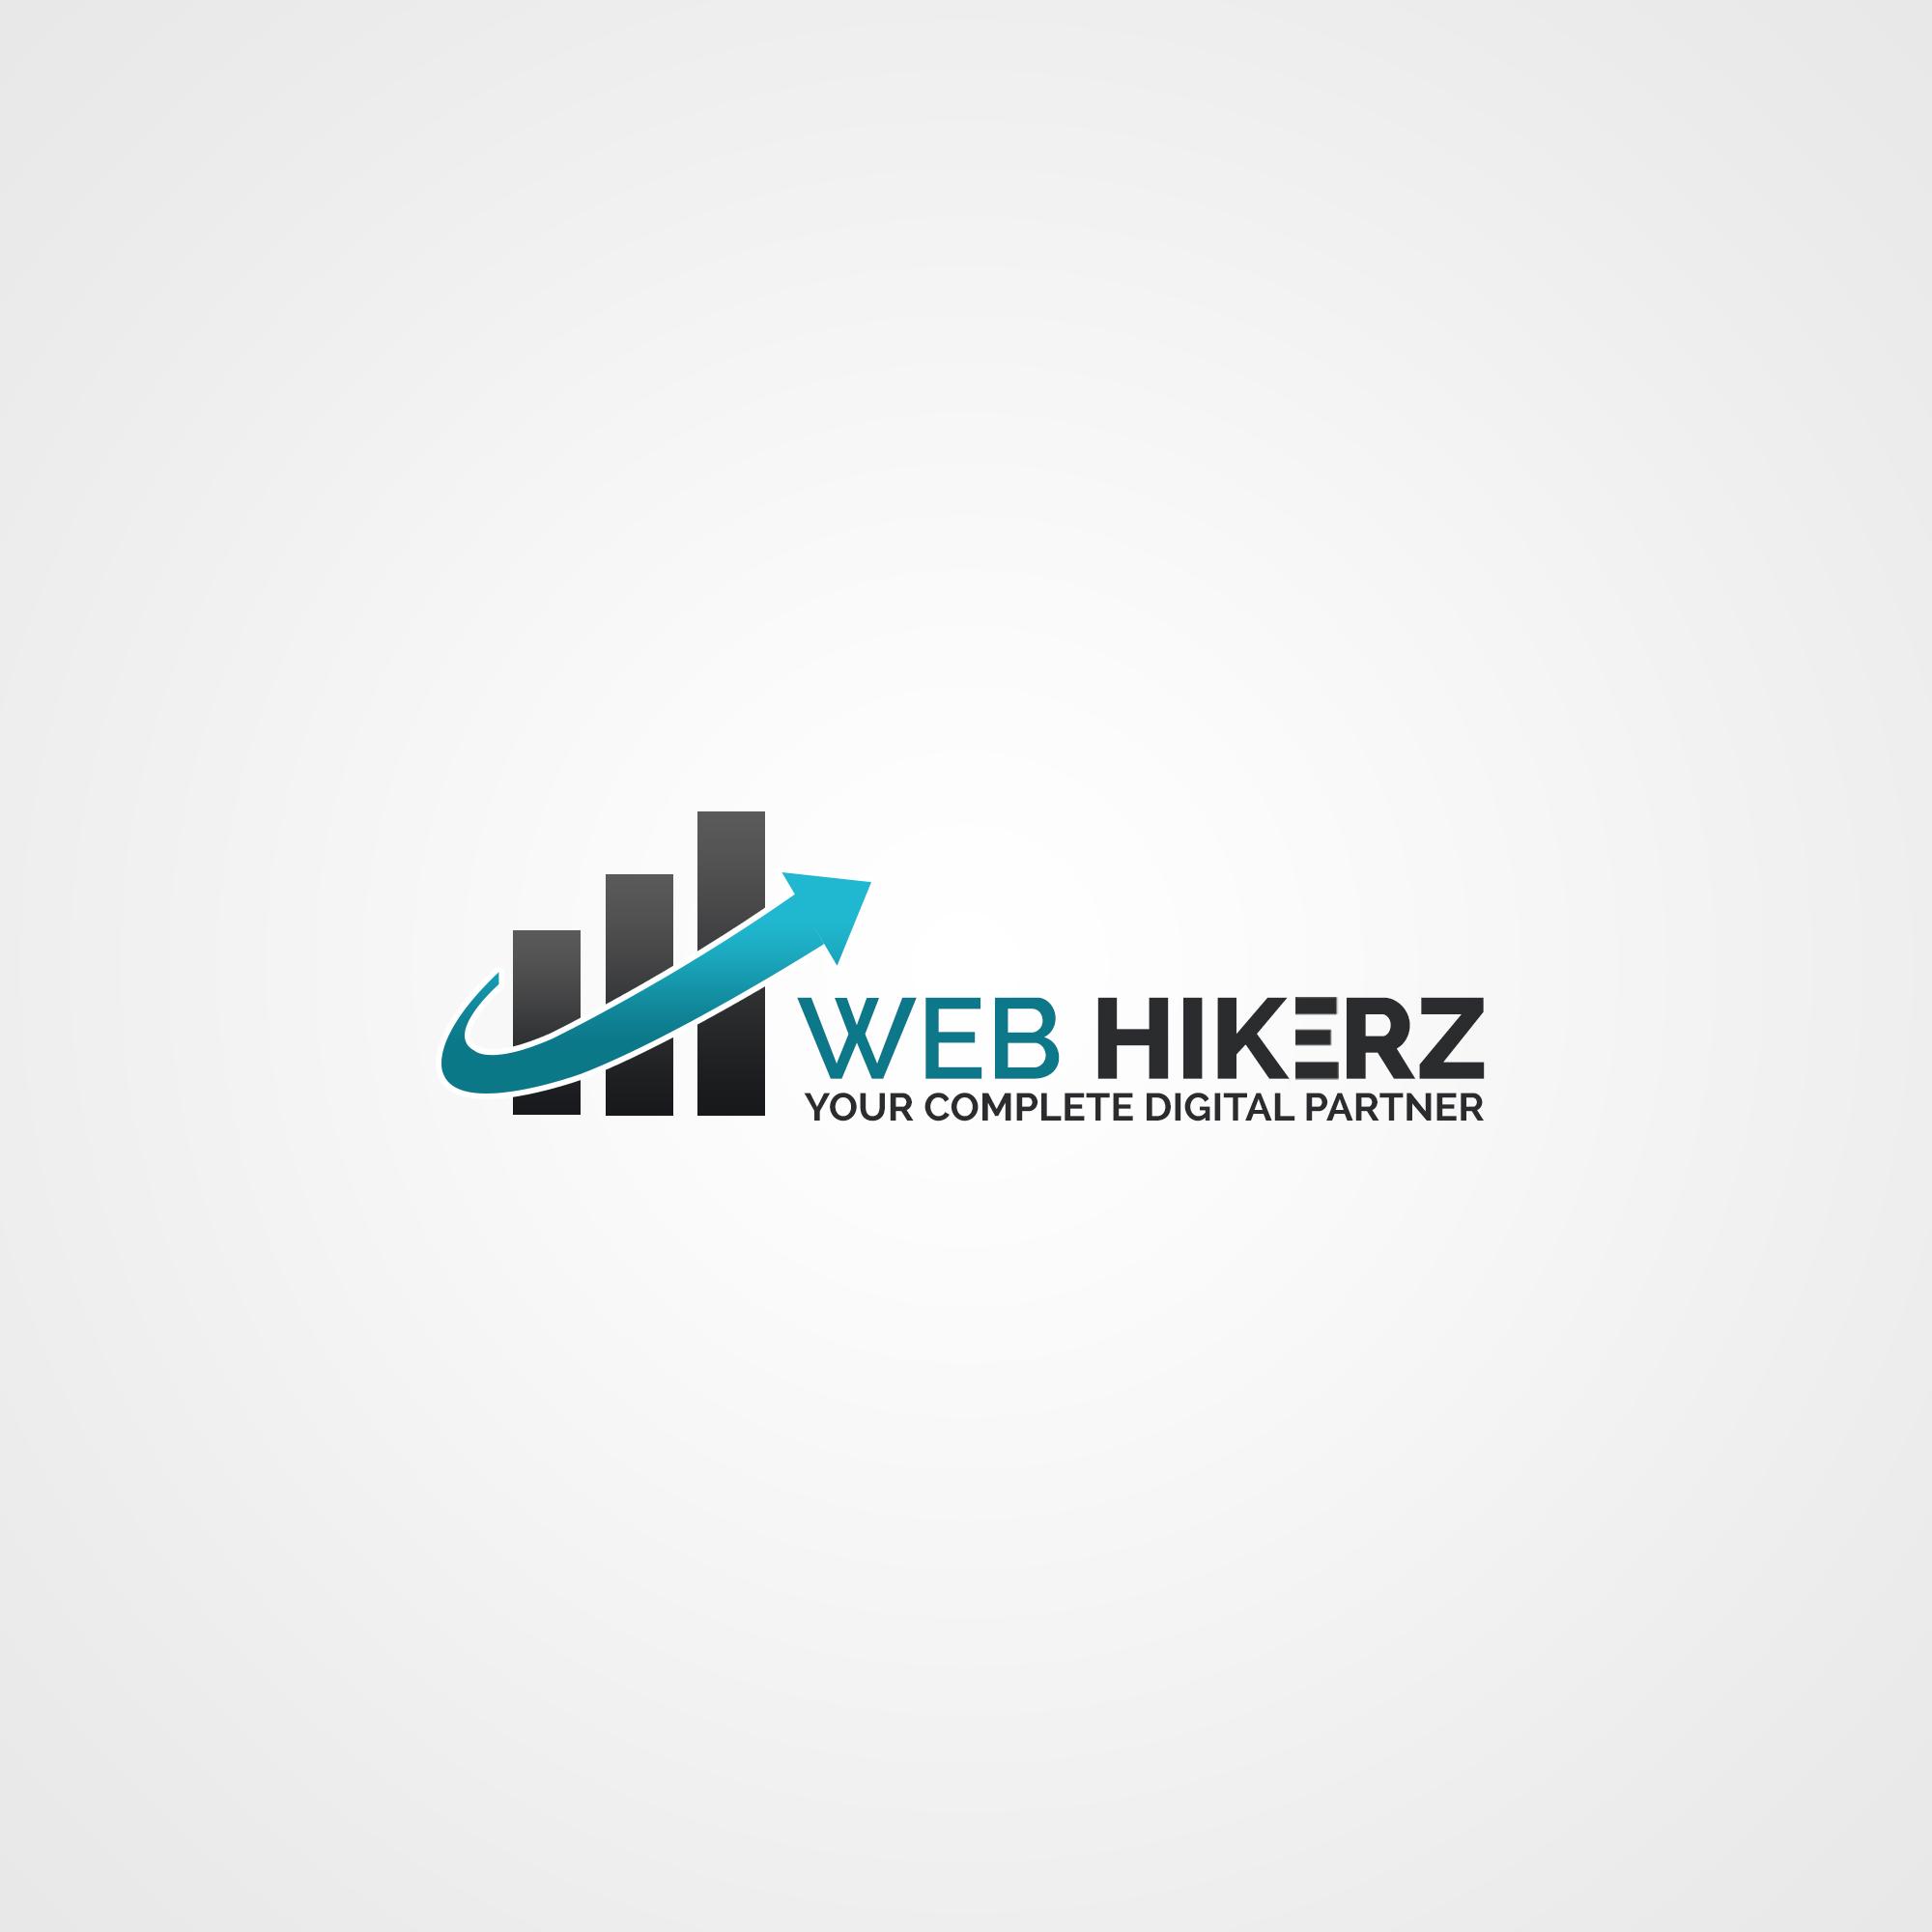 Web Hikerz profile on Qualified.One